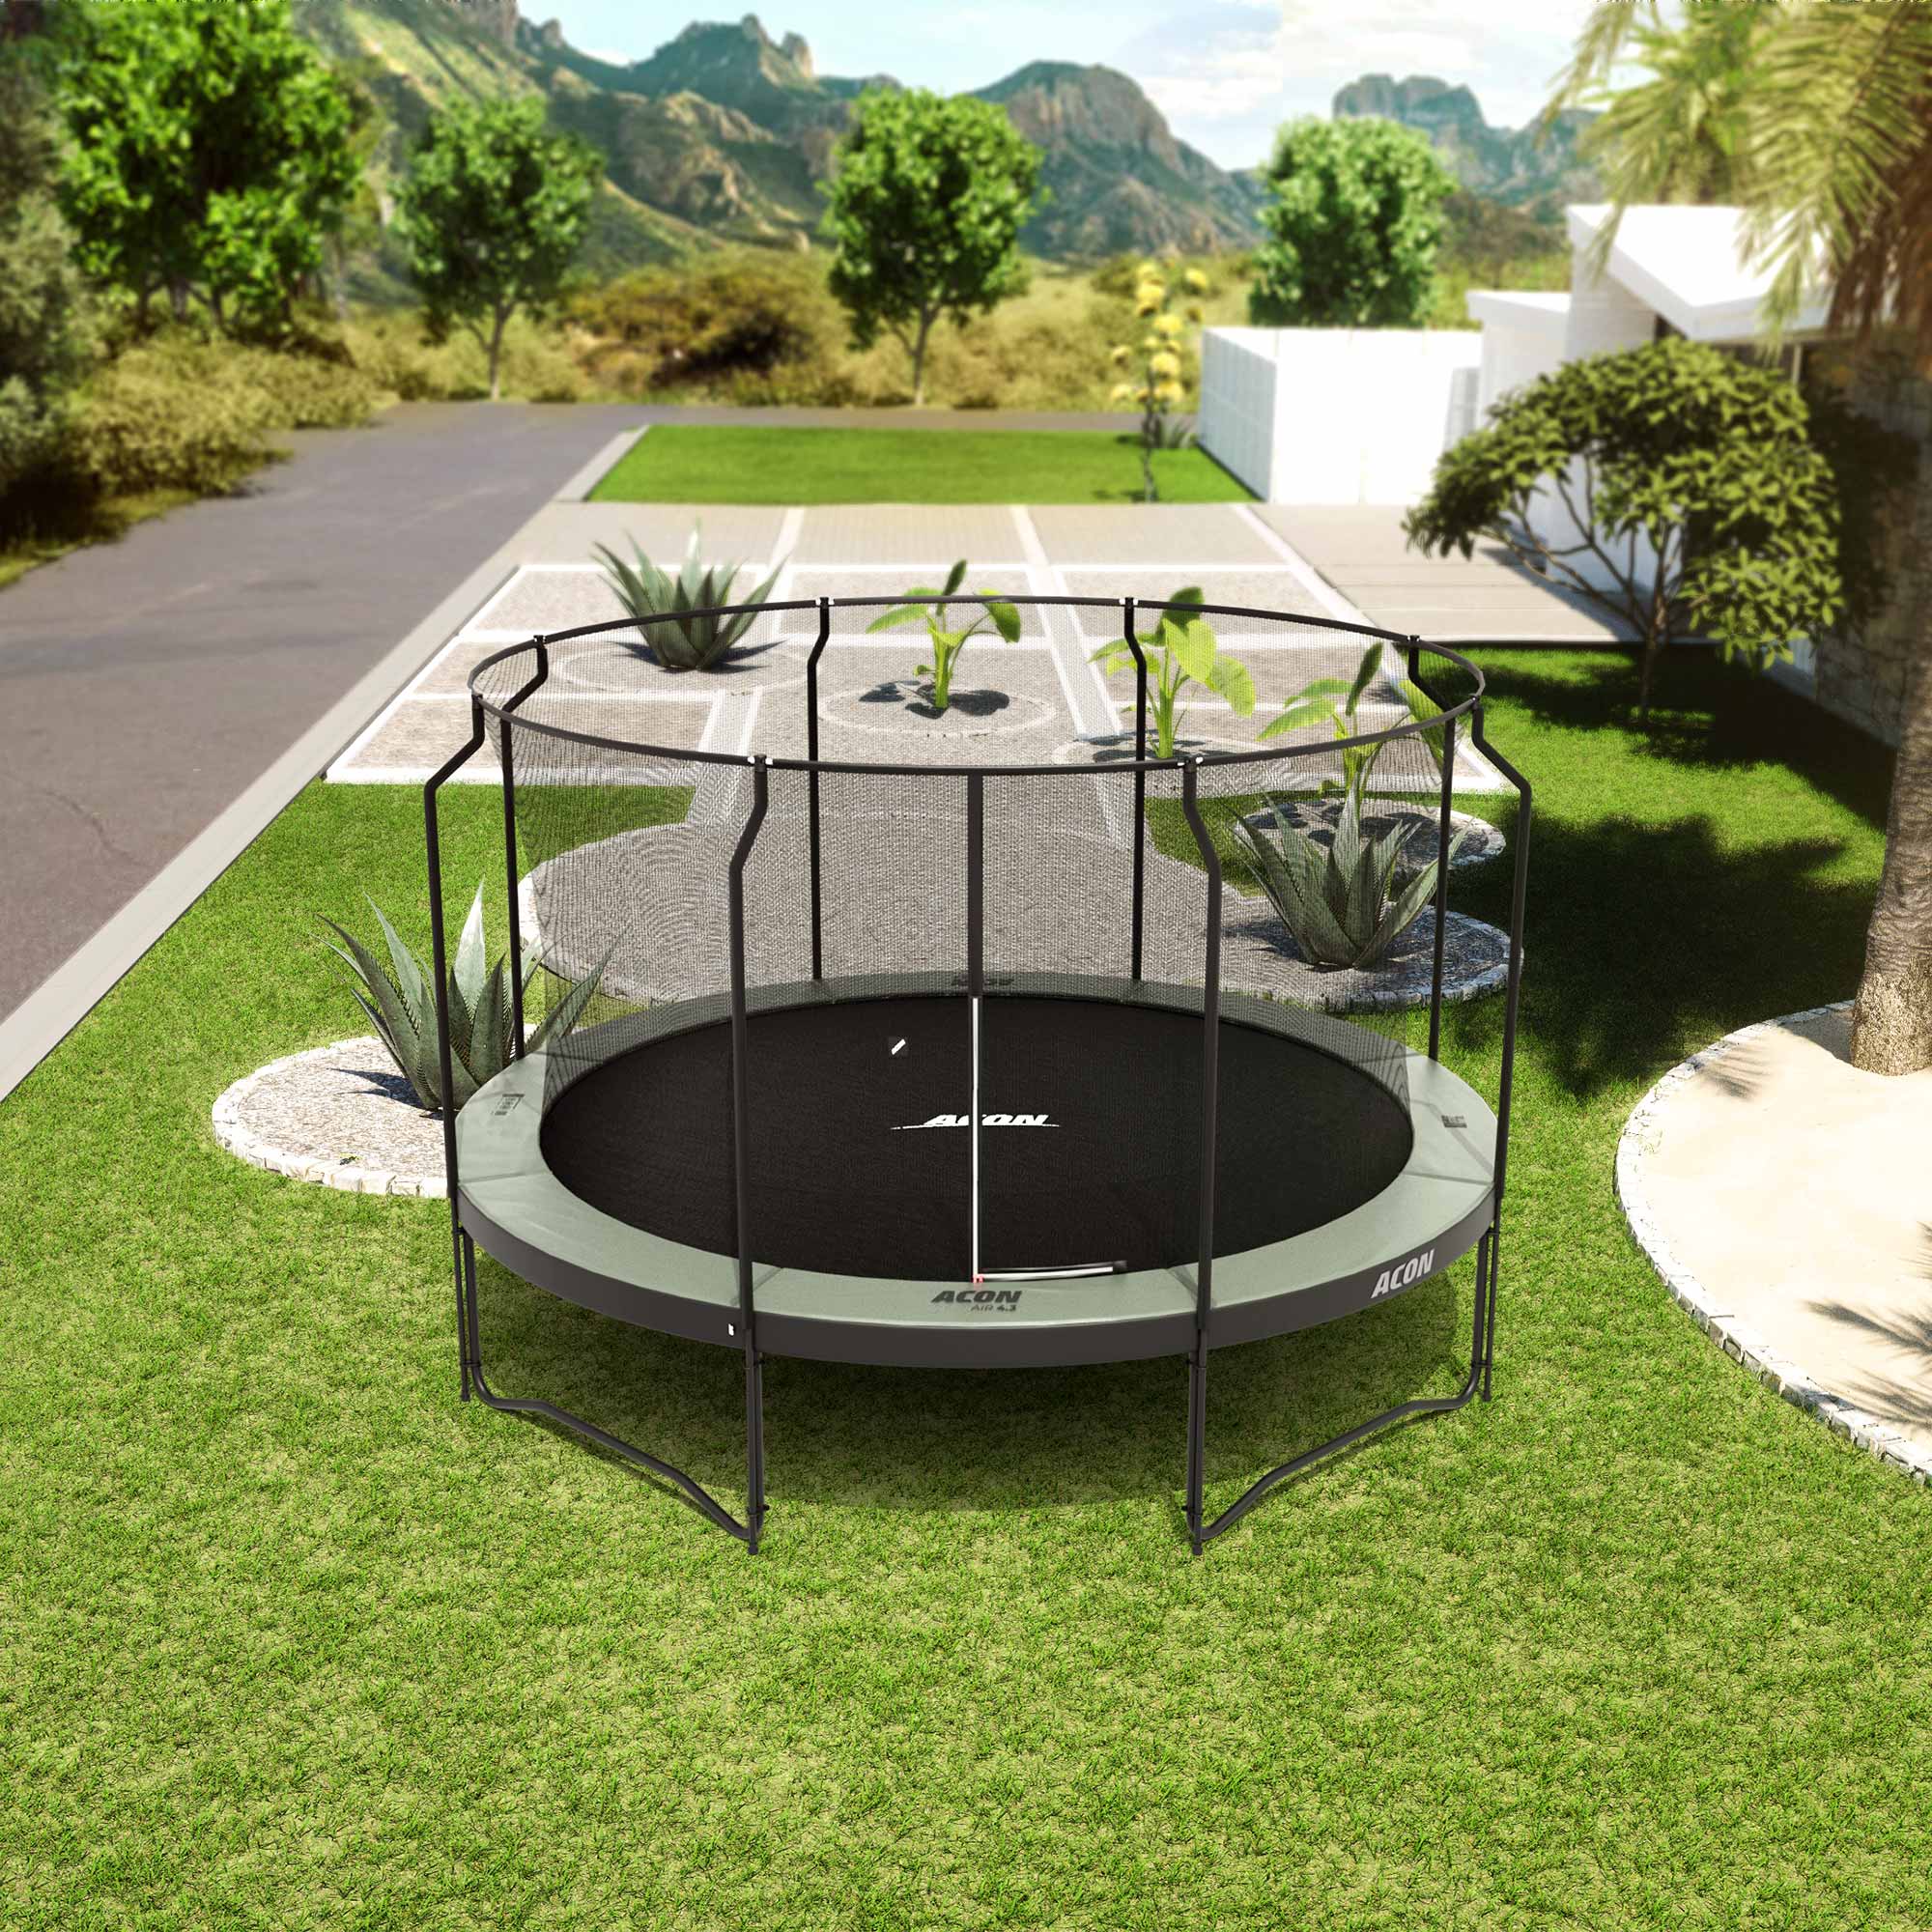 ACON Air 14ft Trampoline with Premium Enclosure in the backyard.